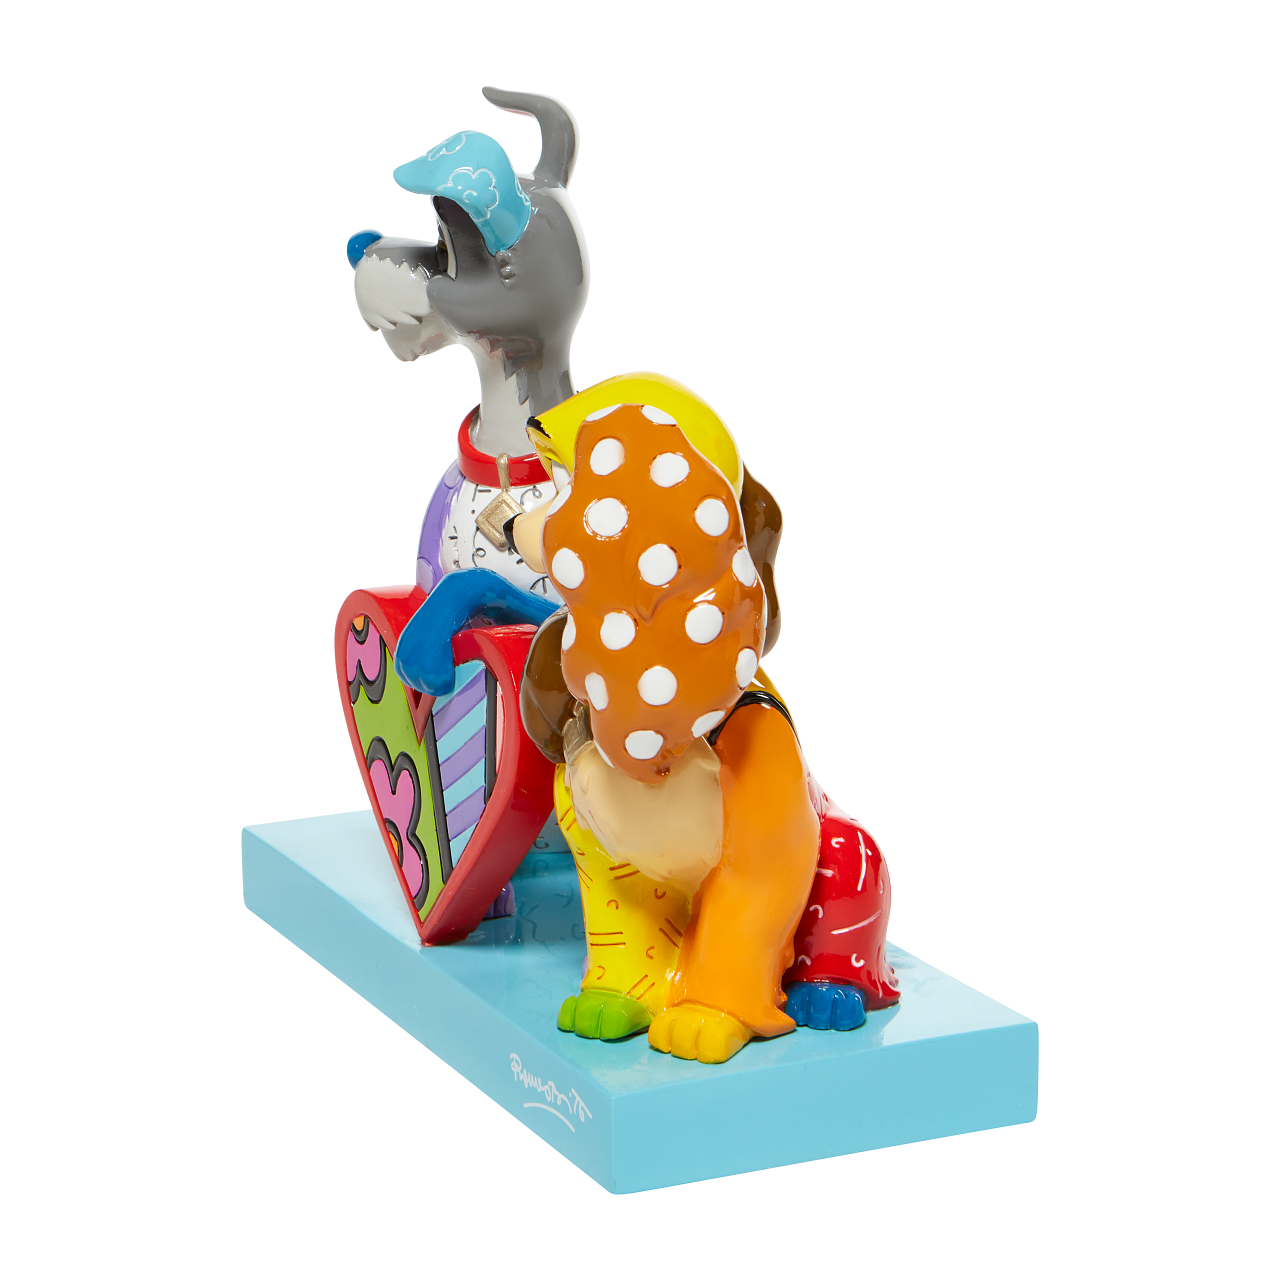 Disney Britto - Lady & the Tramp Numbered Limited Edition 3000 - britto, Disney, enesco, lady & the tramp, limited edition, New Arrivals - Gadgetz Home